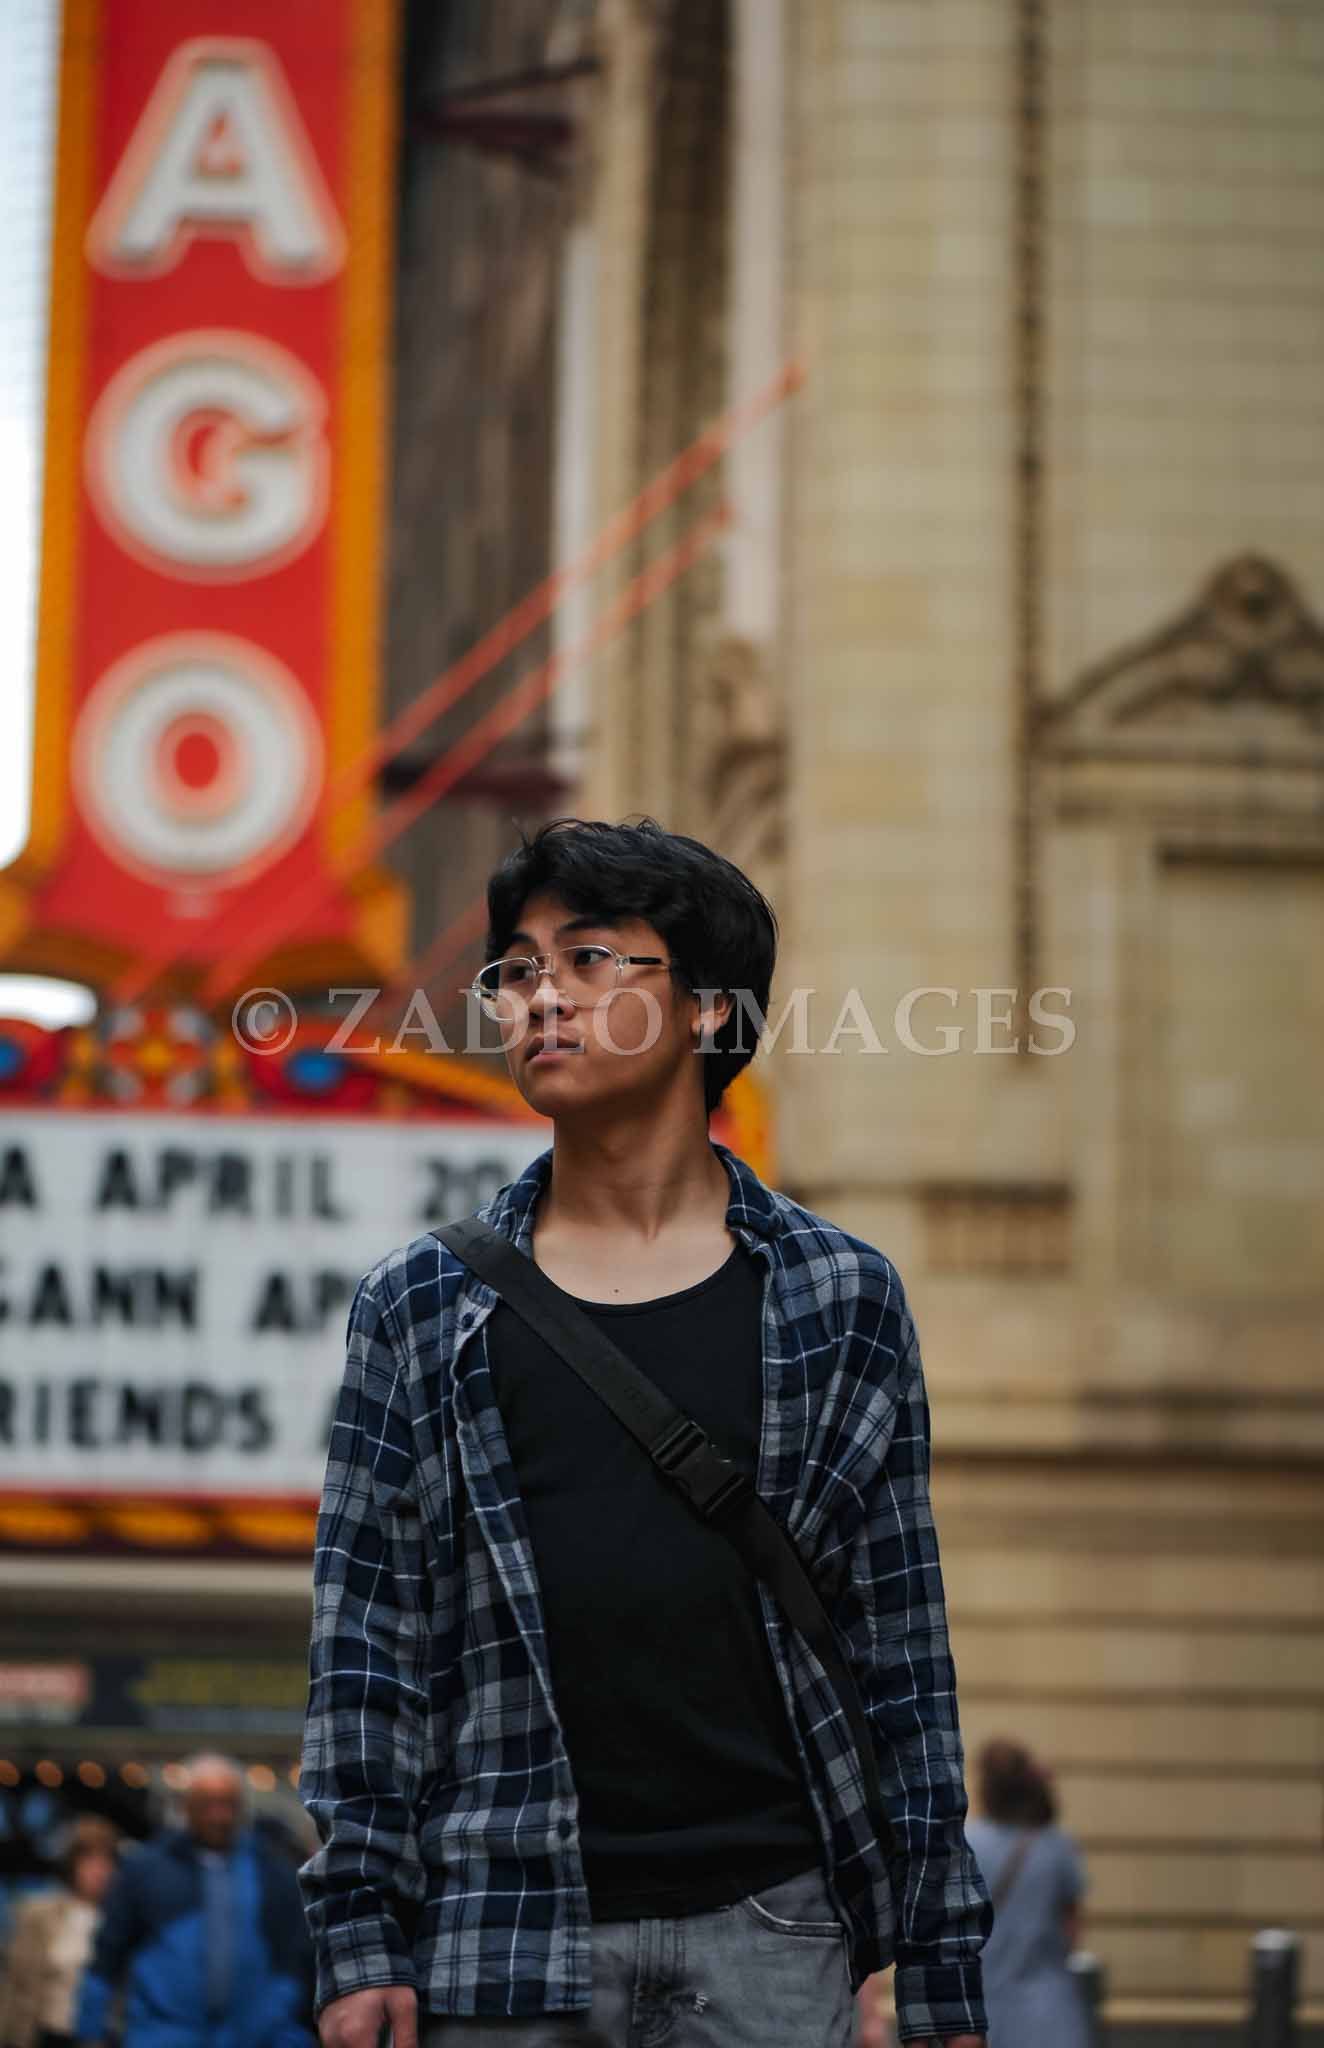 Teen boy in front of Chicago Theater sign.